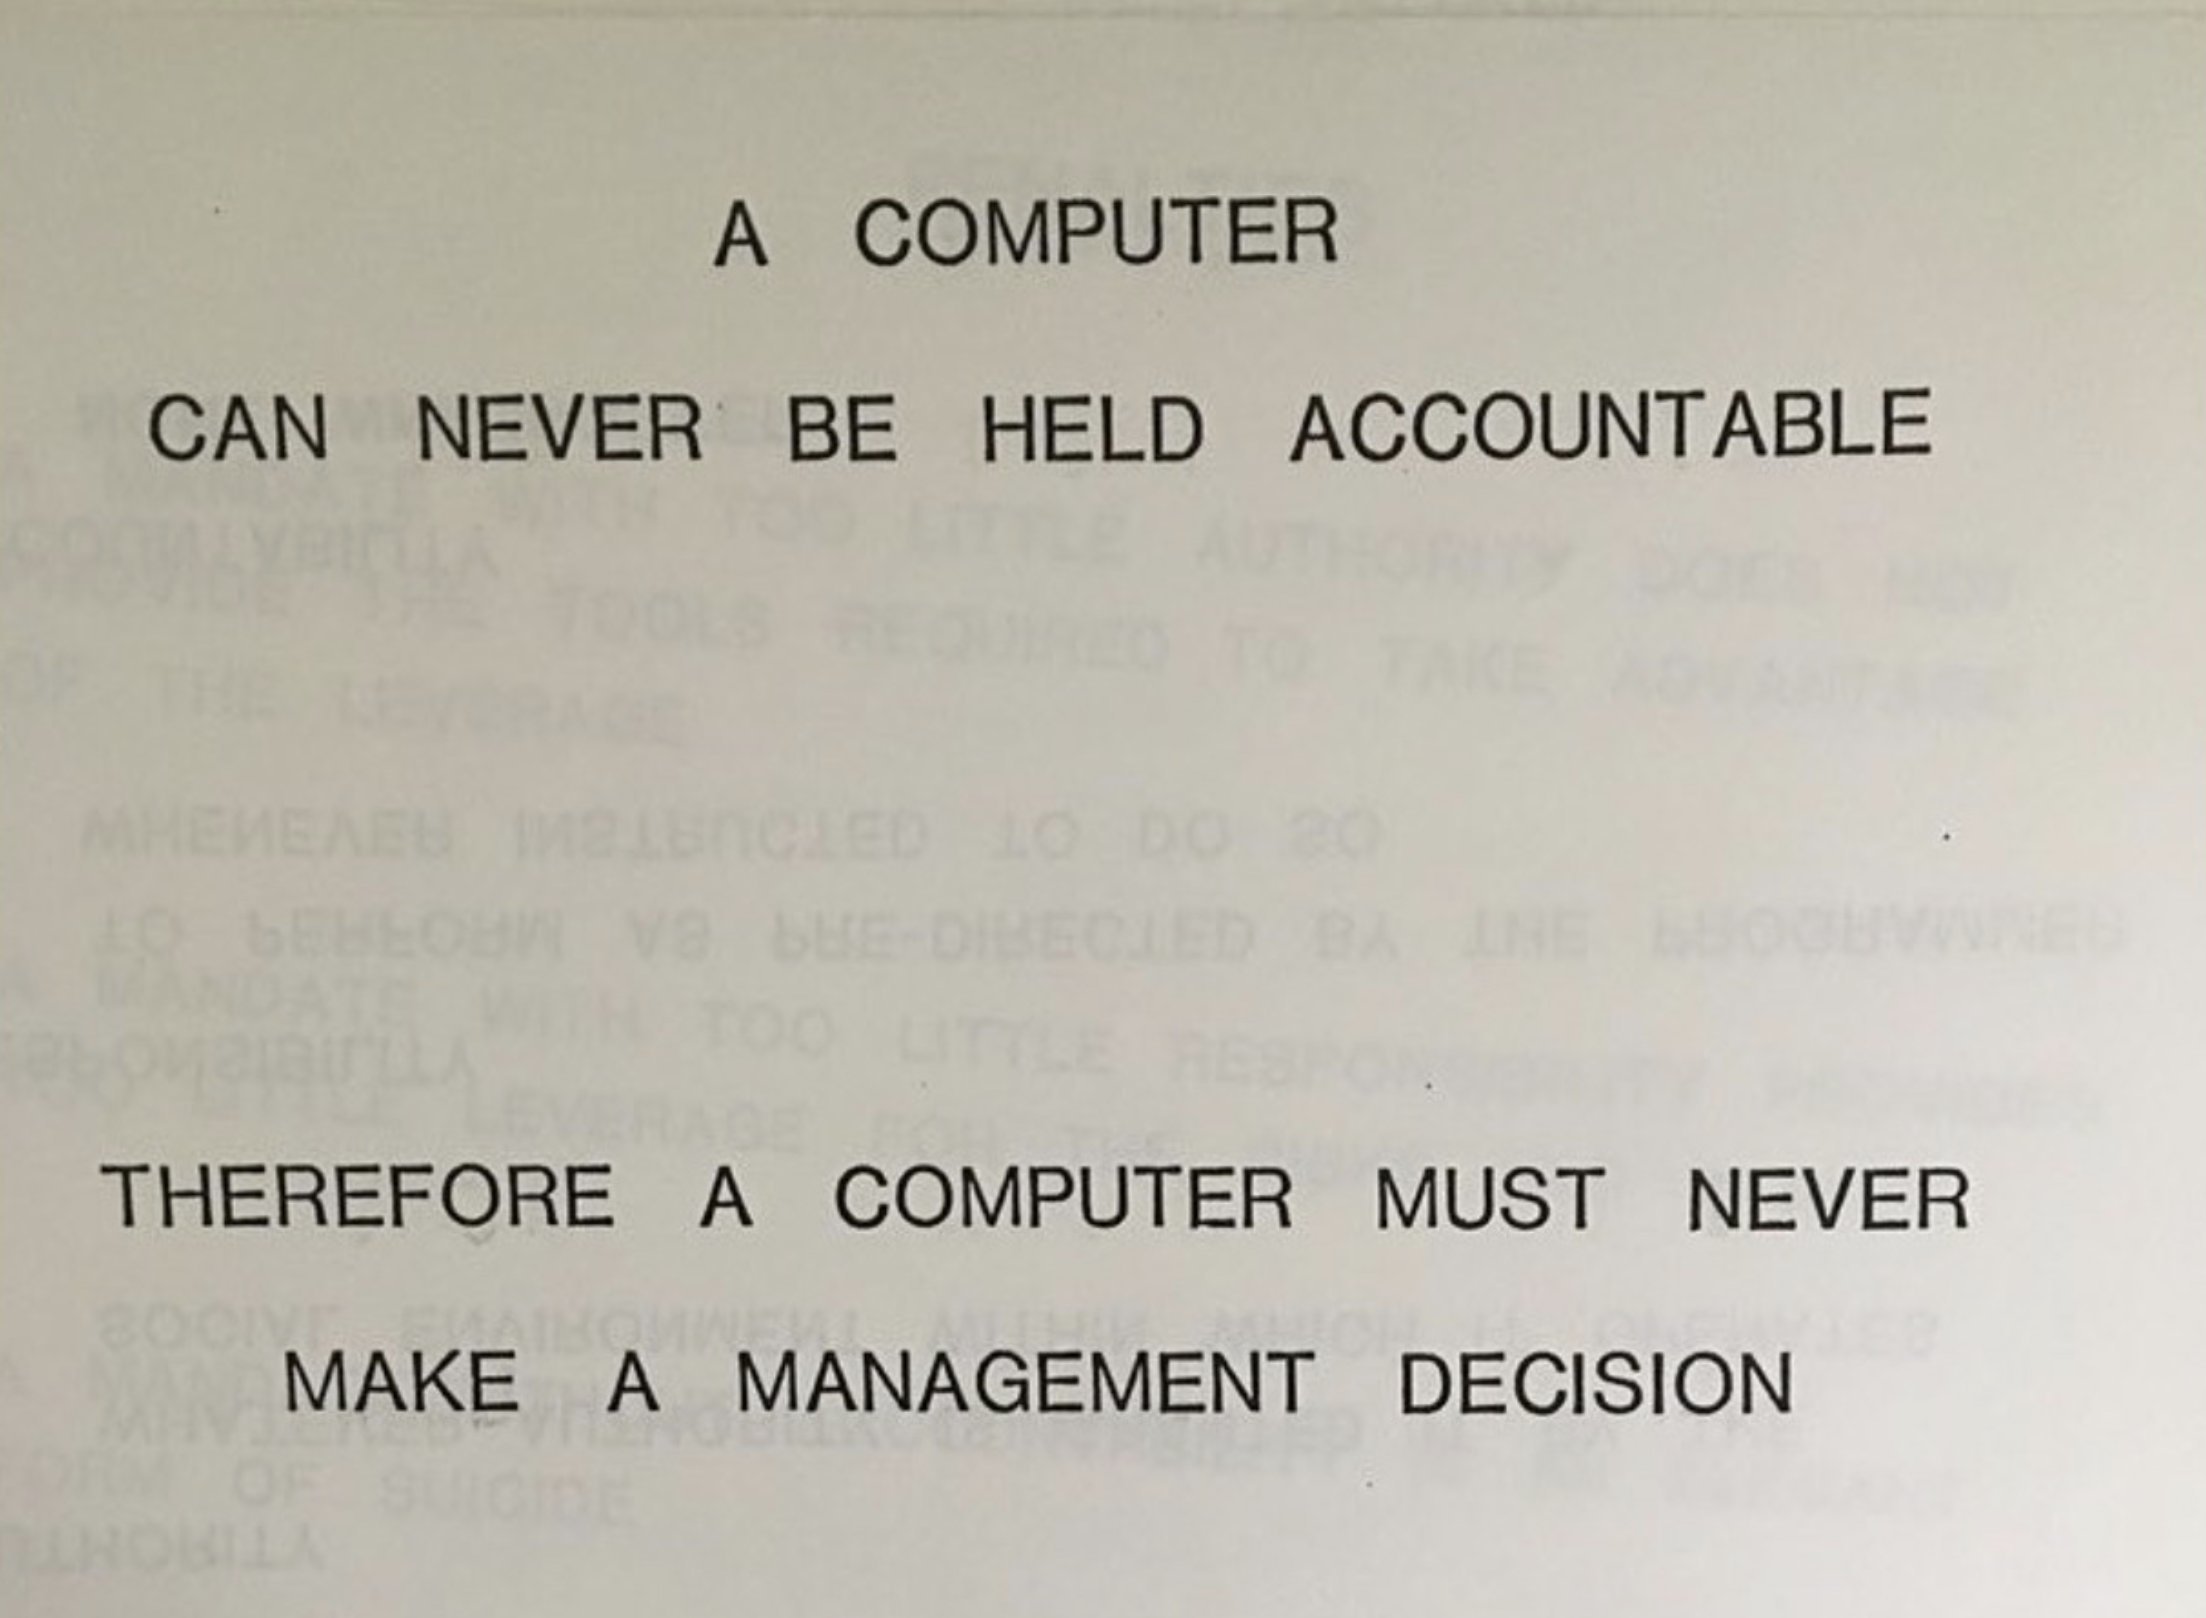 A slide from a 1979 IBM presentation reading 'A computer can never be held accountable, therefore a computer must never make a management decision.'